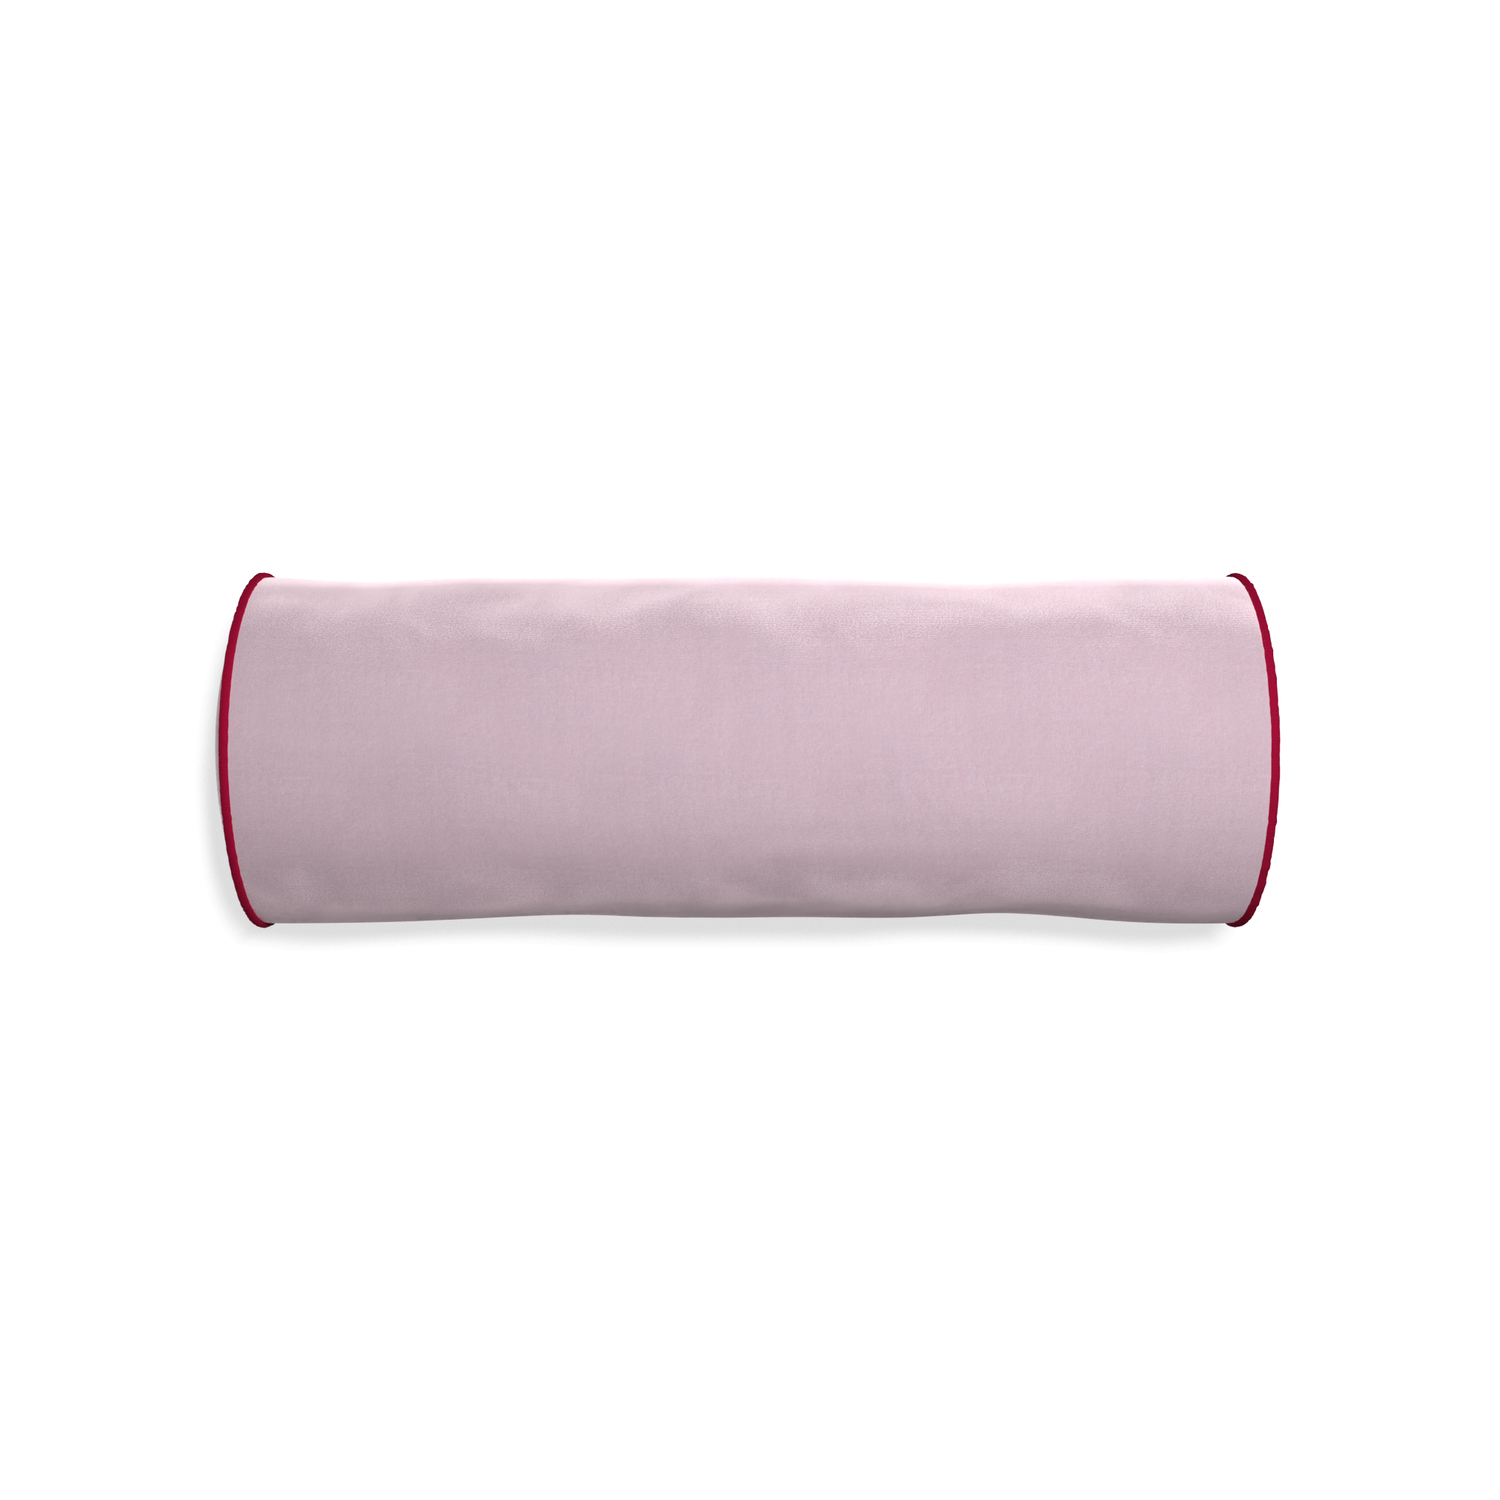 bolster lilac velvet pillow with dark red piping 